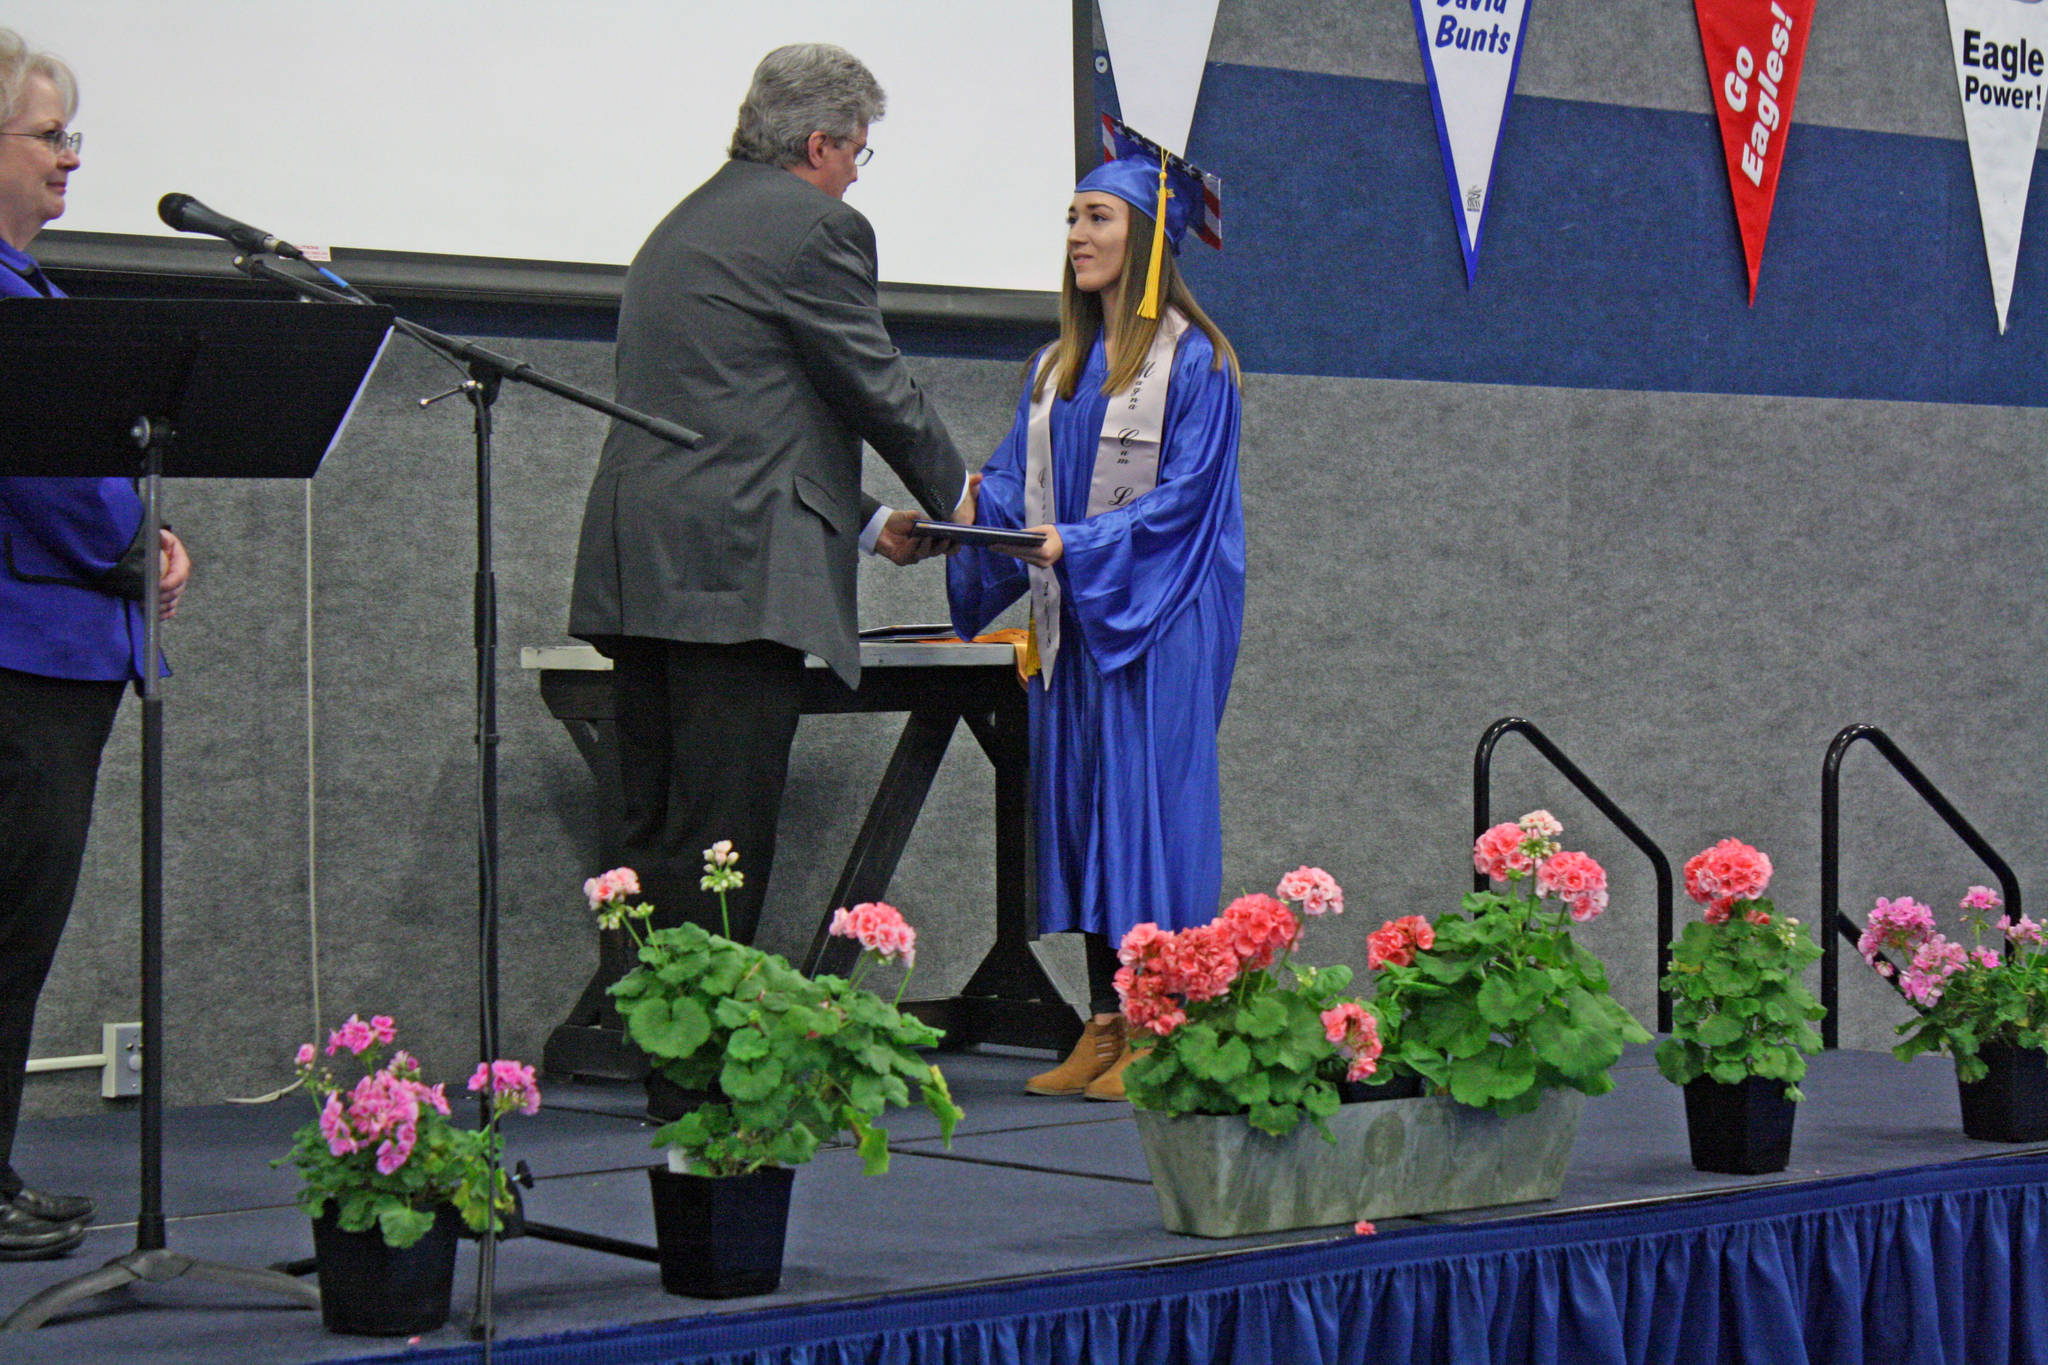 Breona Michele DeLon accepts her diploma from Cook Inlet Academy in Soldotna, Alaska, on Sunday, May 6. DeLon, who graduated magna cum laude, received a full-ride scholarship from the Naval Reserve Officers Training Corps to attend Point Loma Nazarene University in San Diego, where she will study social work with an emphasis on sociology. (Photo by Erin Thompson/Peninsula Clarion)